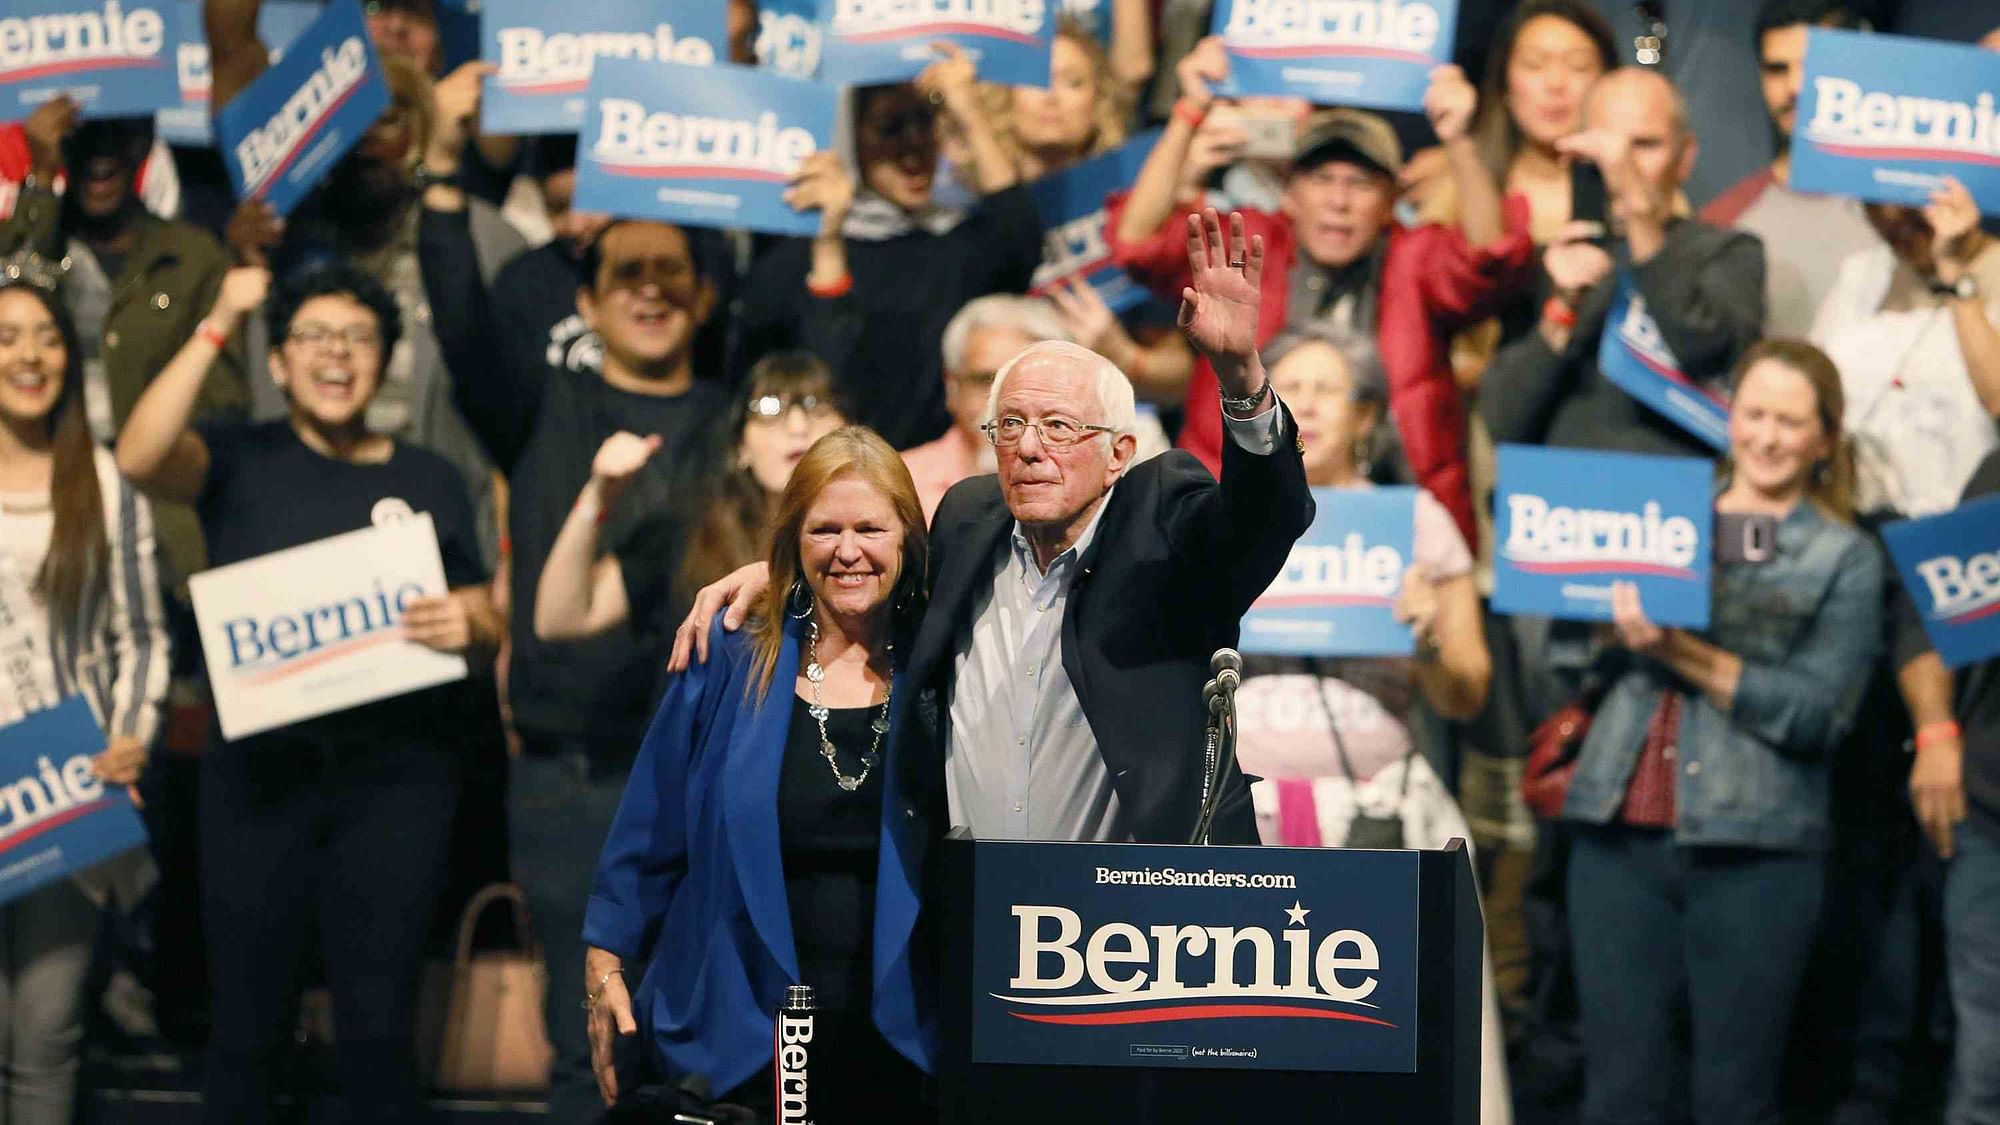 Democratic presidential candidate Sen. Bernie Sanders with his wife, Jane O’Meara Sanders, waves his hand during a rally in Texas on Saturday, 22 February 2020.&nbsp;